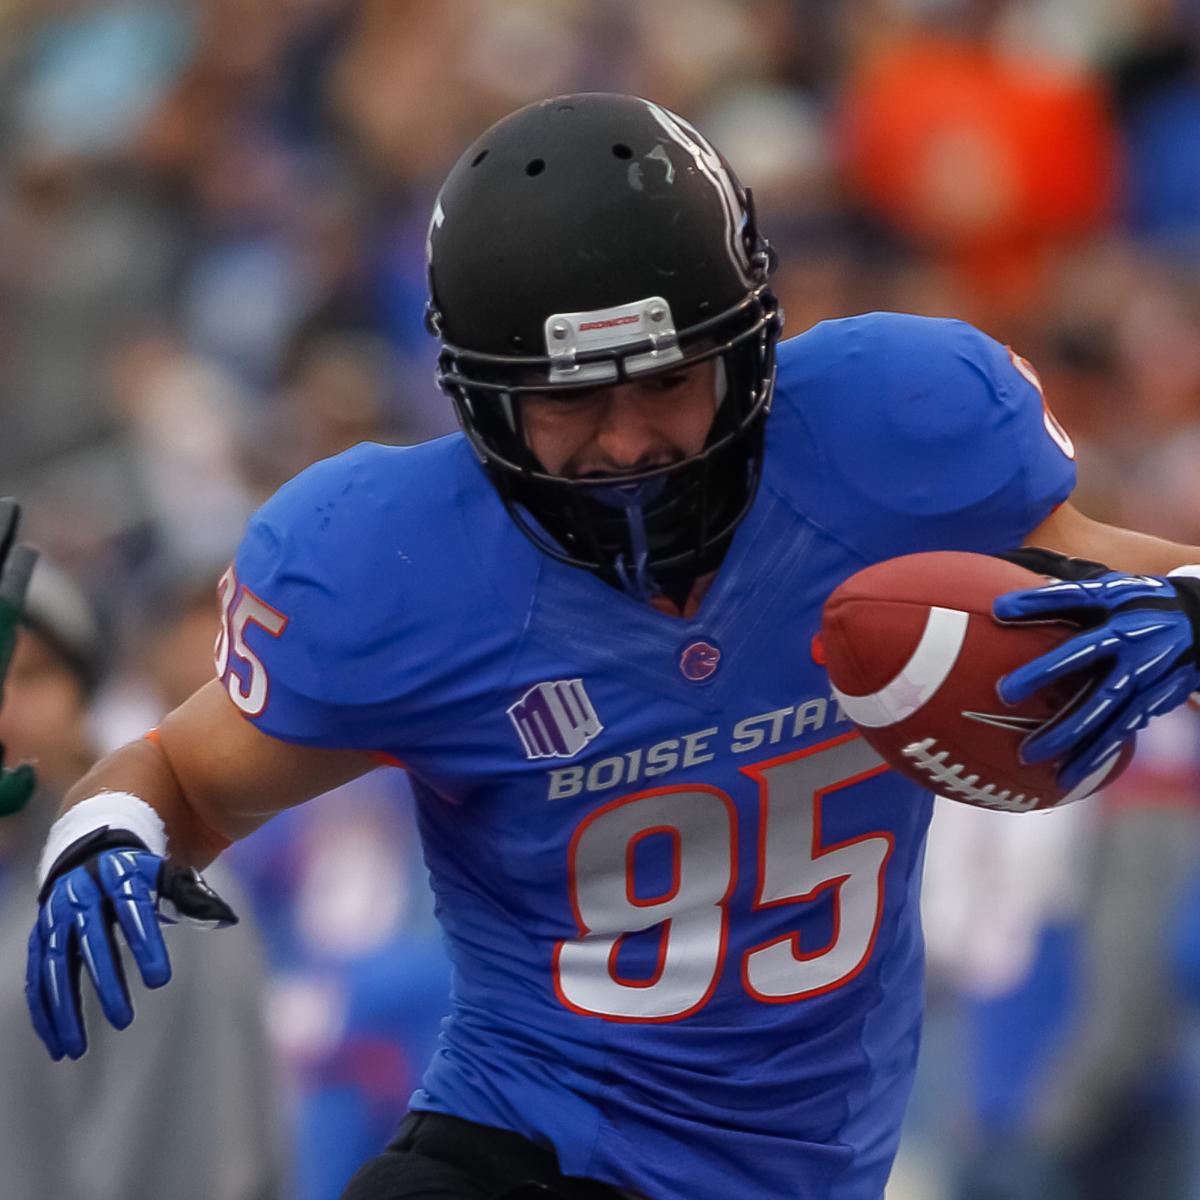 Boise State Football Believe It or Not, the Broncos Are Back in the